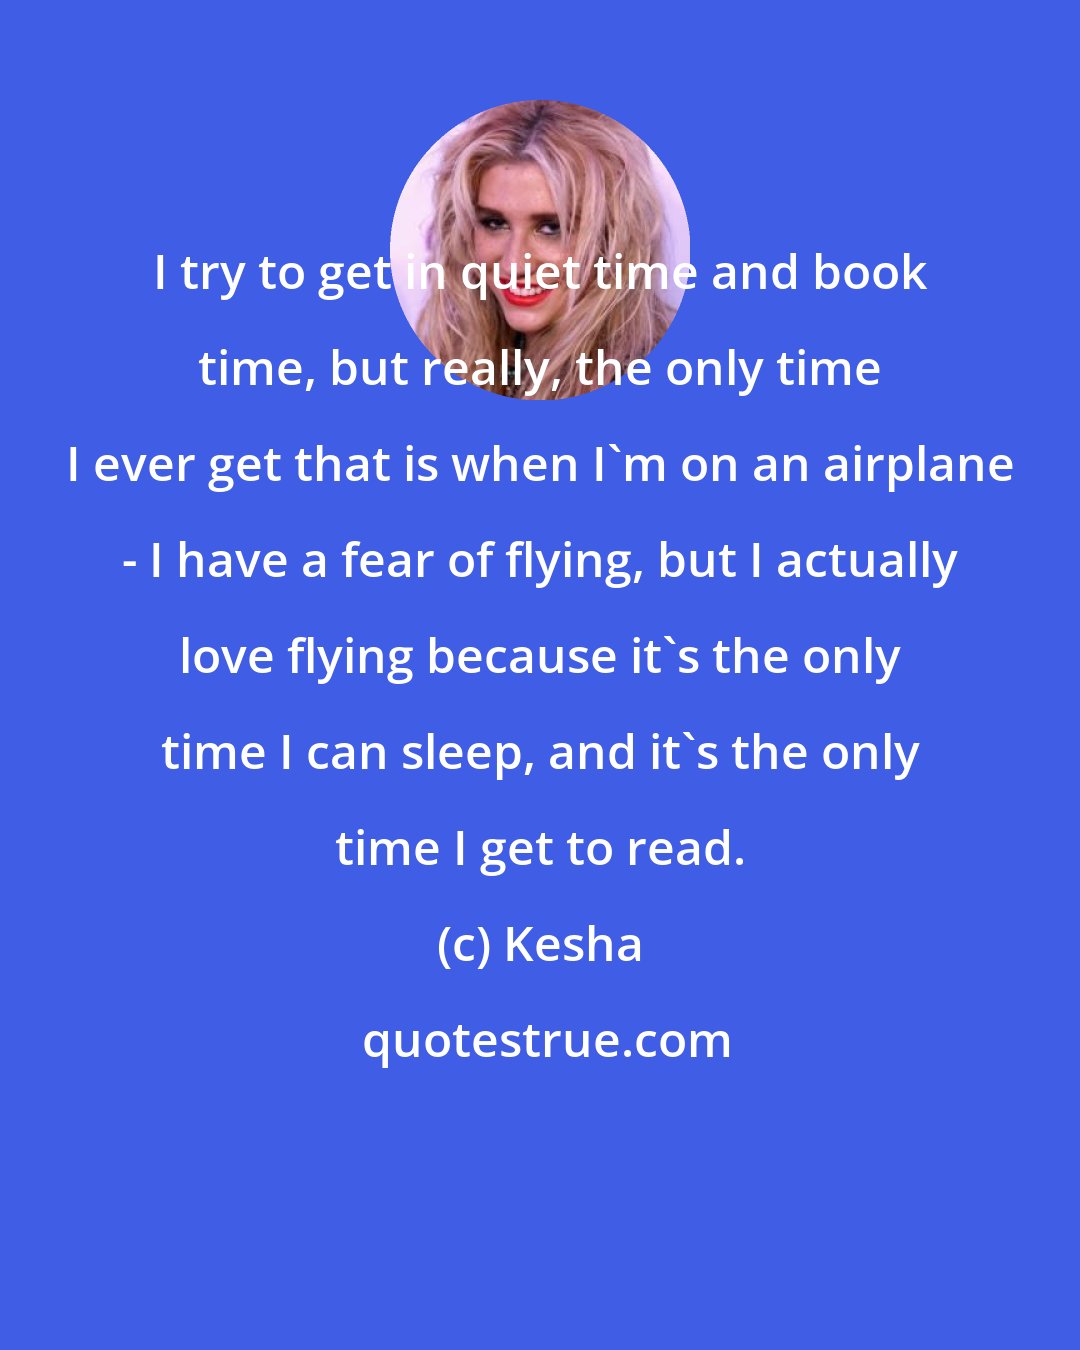 Kesha: I try to get in quiet time and book time, but really, the only time I ever get that is when I'm on an airplane - I have a fear of flying, but I actually love flying because it's the only time I can sleep, and it's the only time I get to read.